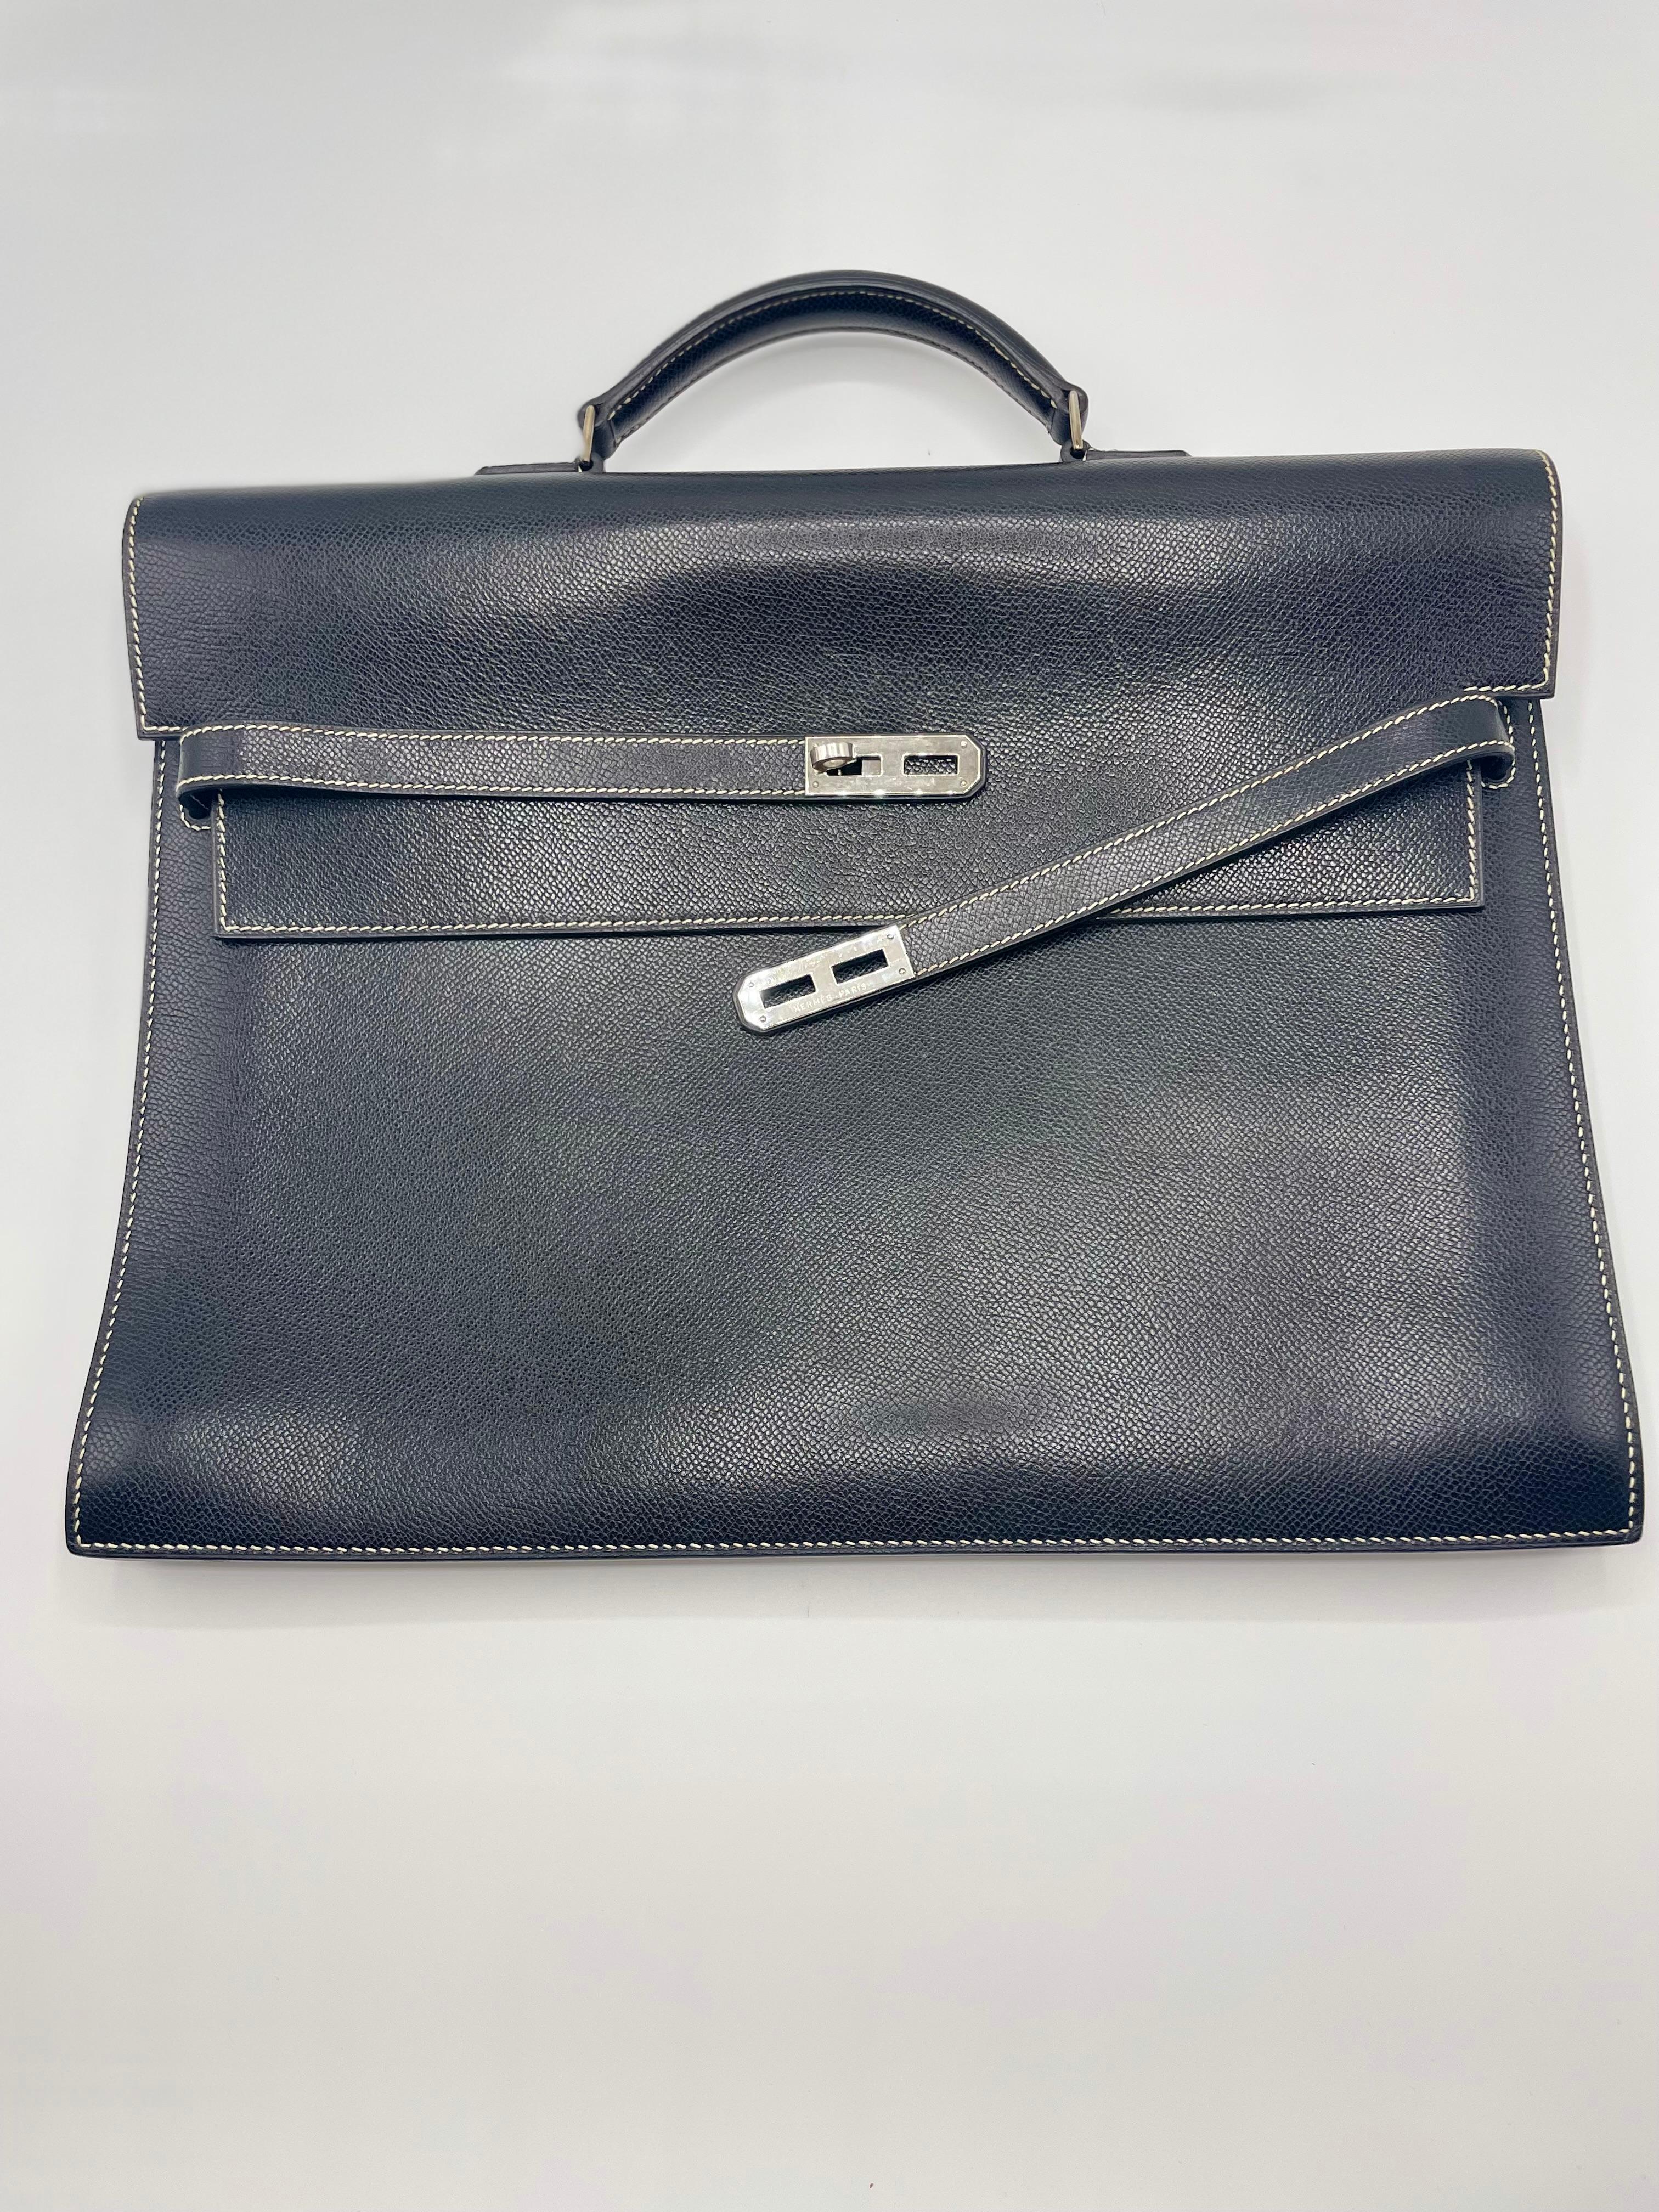 This fashionable handbag is fashioned from supple dark blue calfskin leather. The case has a robust leather top handle with silver palladium links, a crossing flap with a strap closing, and a Kelly Palladium turn lock. A bell with keys is attached